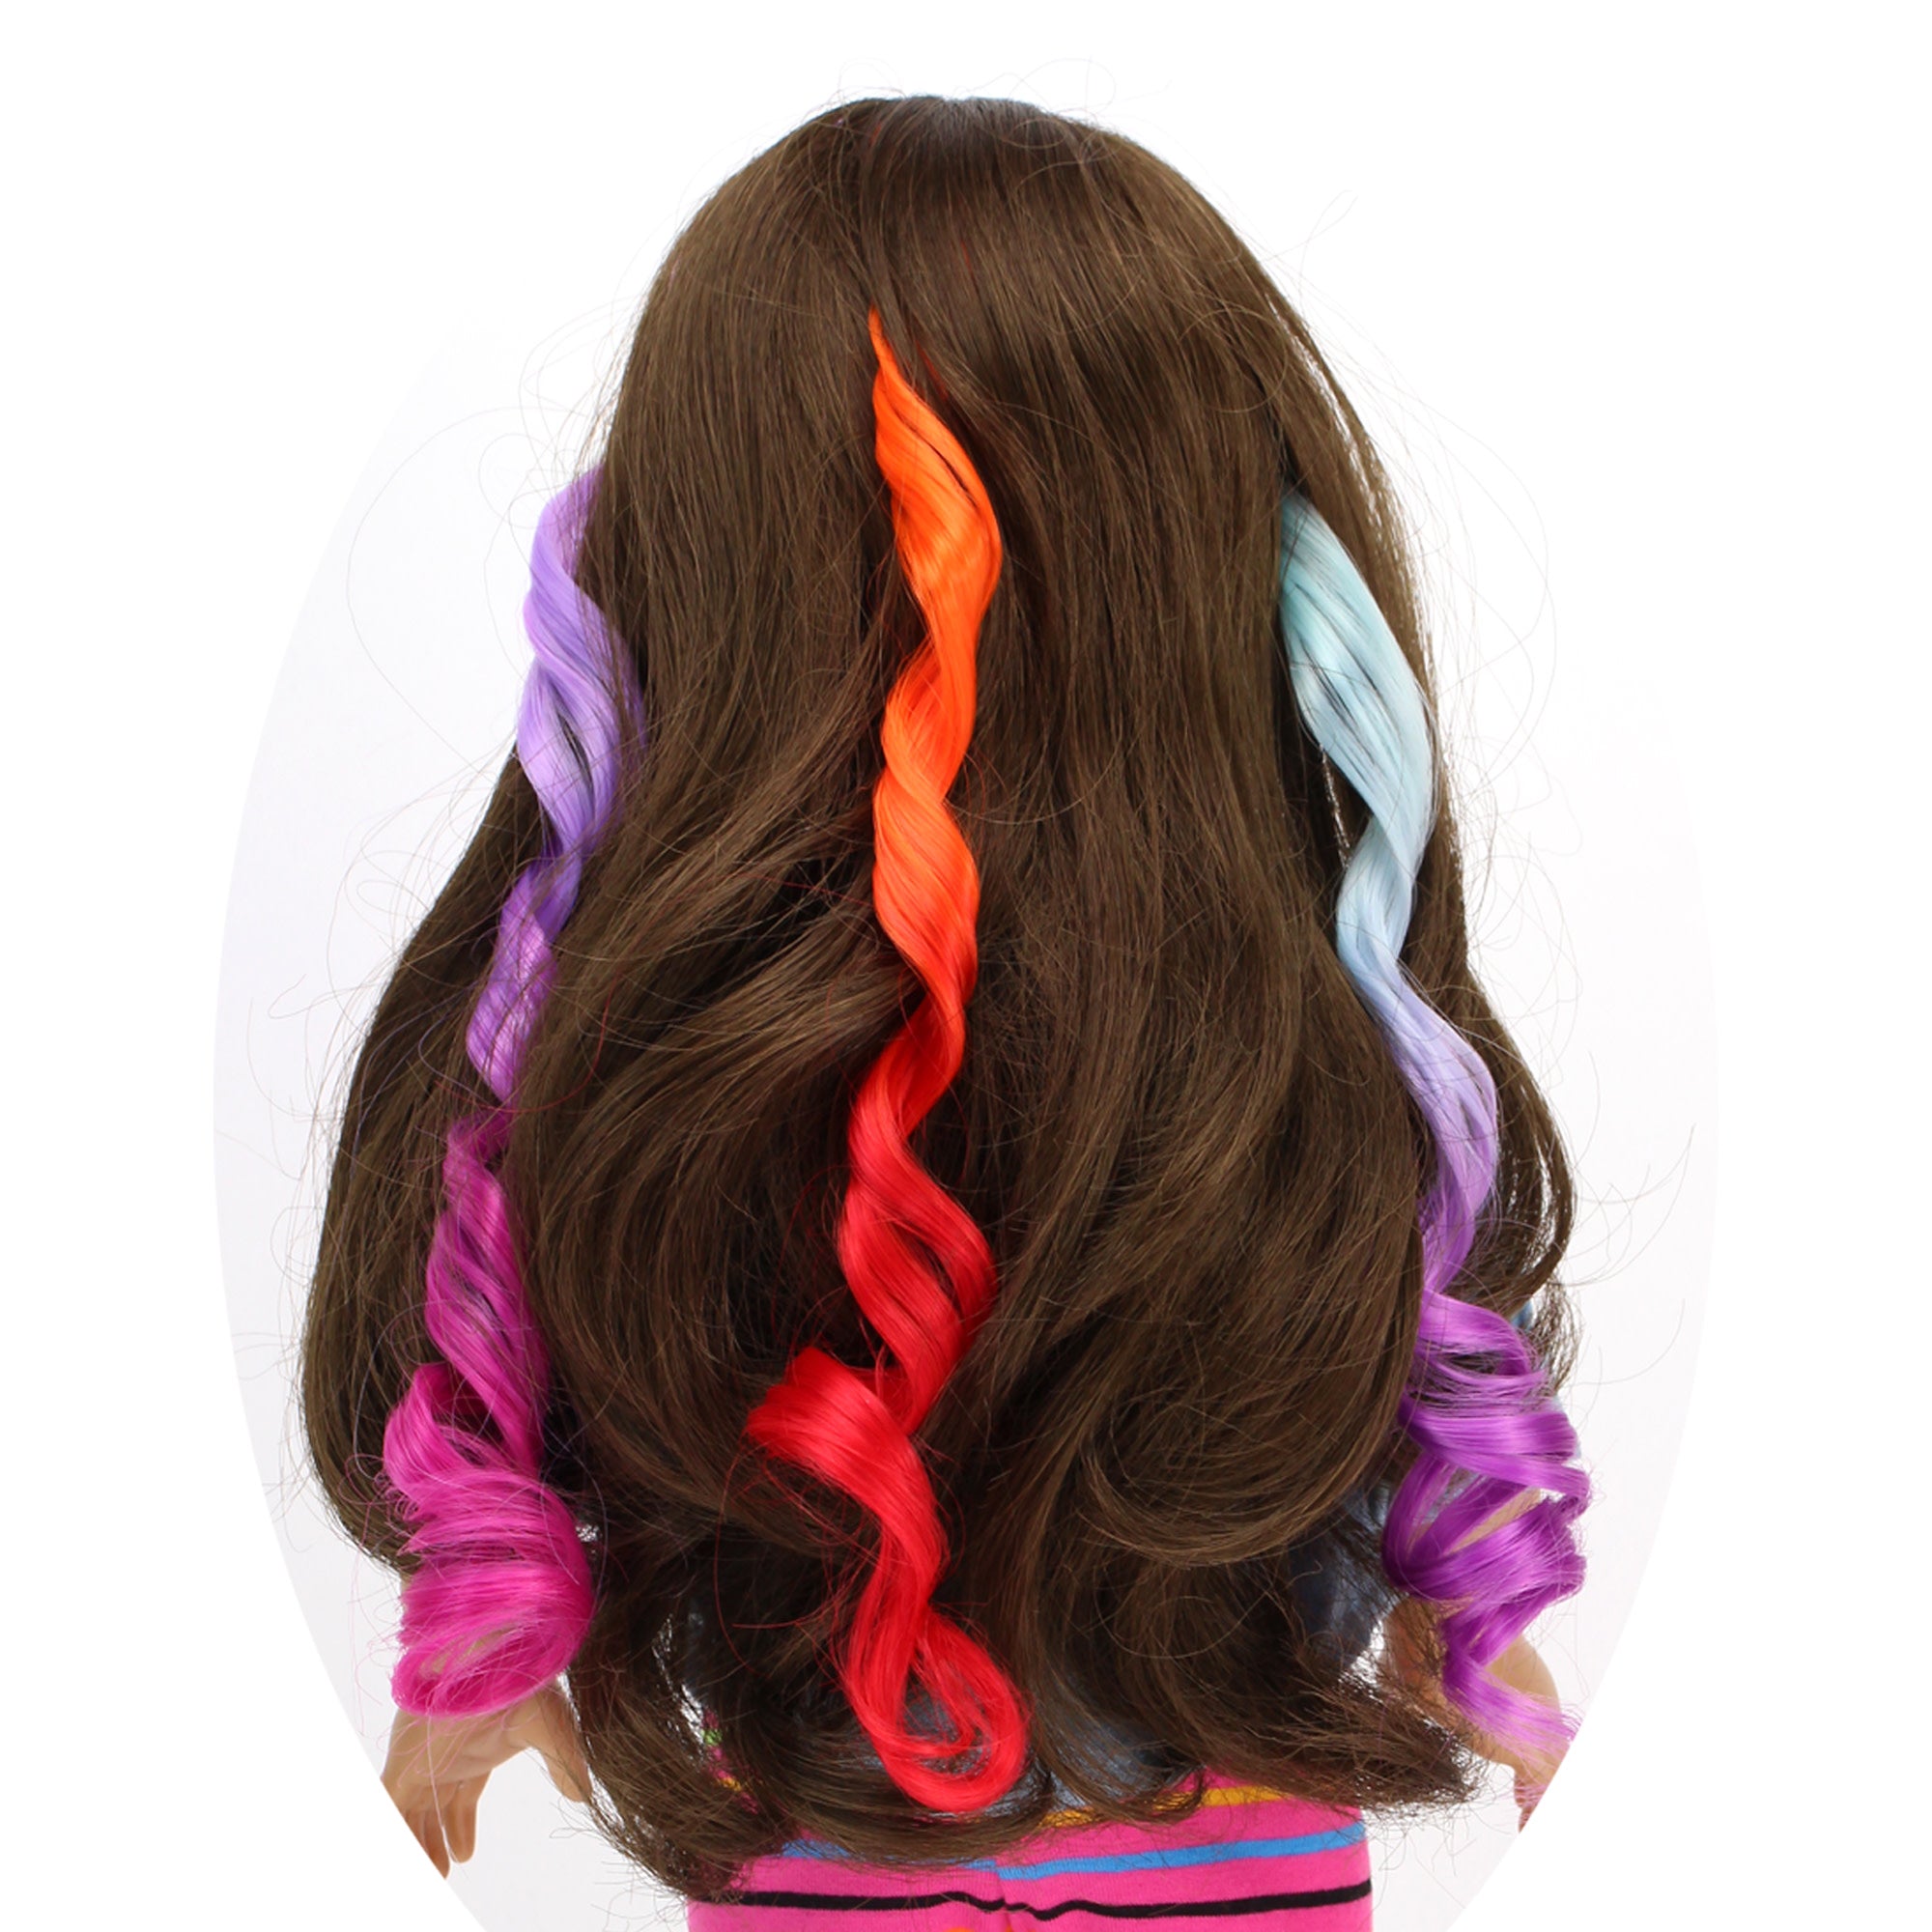 Sophia’s Set of 3 Dress Up Fun Long Curly Colorful Ombre Rainbow Clip-In Hair Extensions for 18” Dolls, Aqua/Orange/Lavender